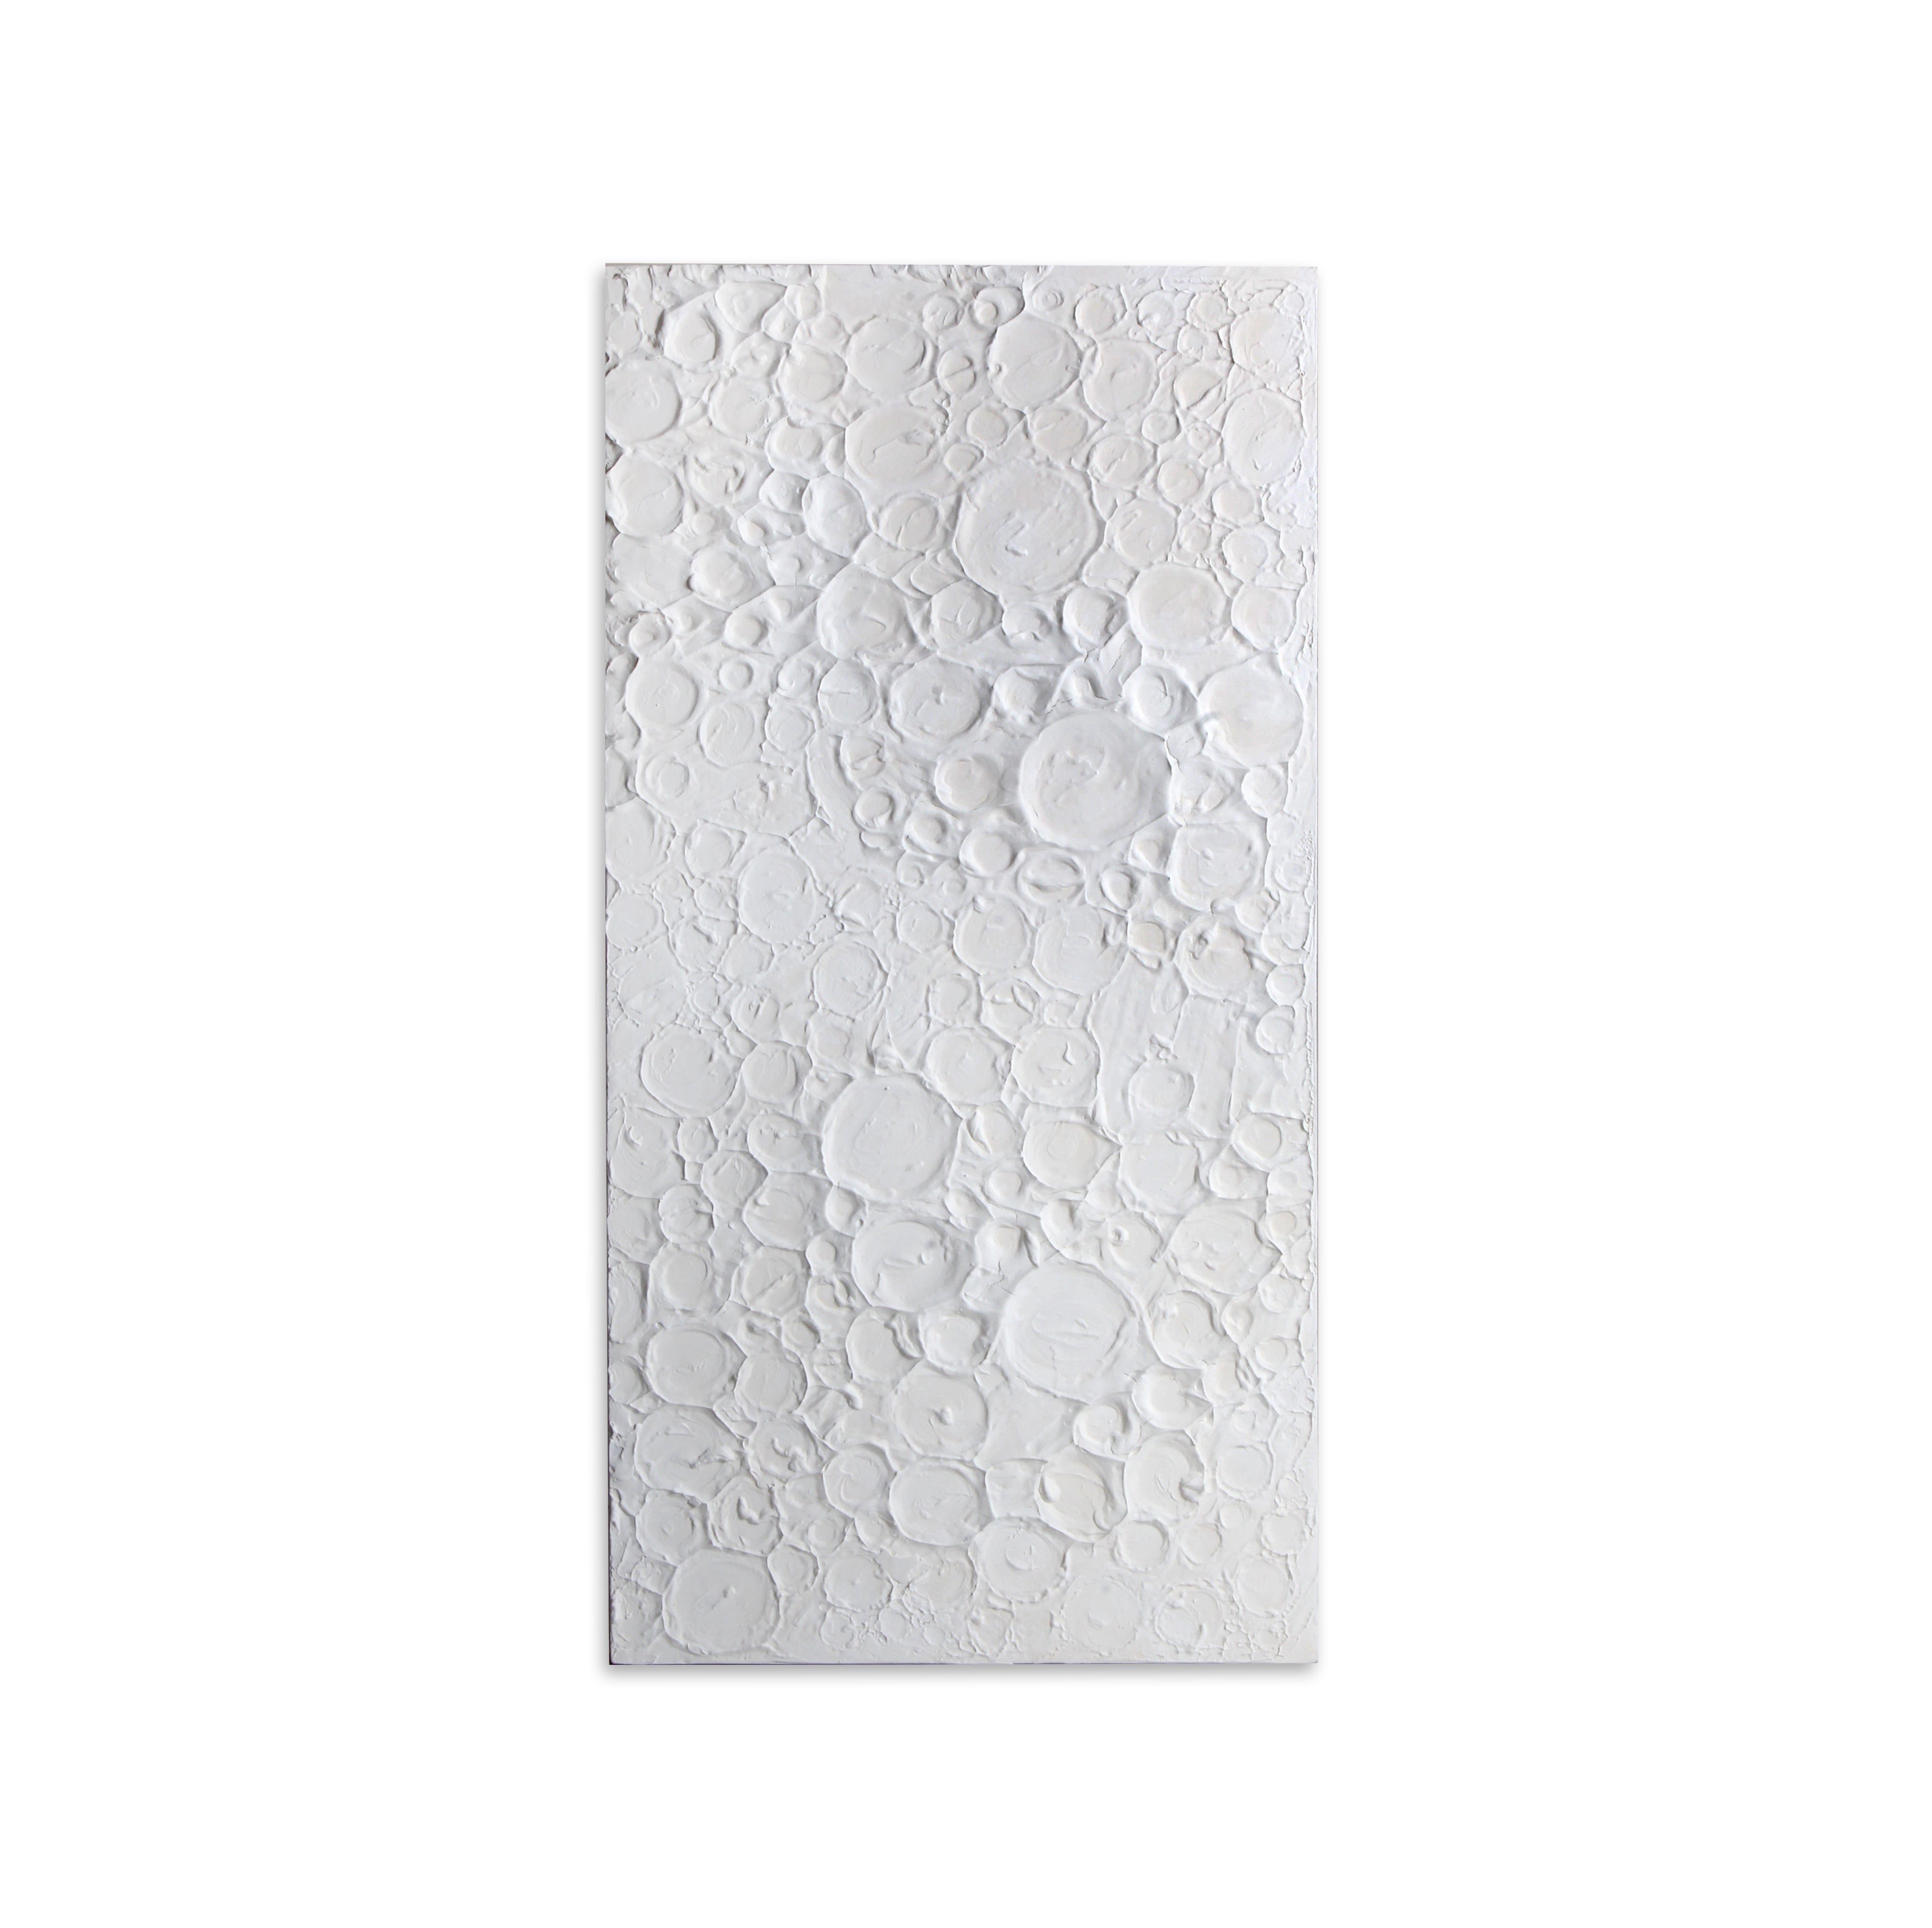 Wall Decor Moon Surface Approx H24 X L12 X D0.78inch 1pc